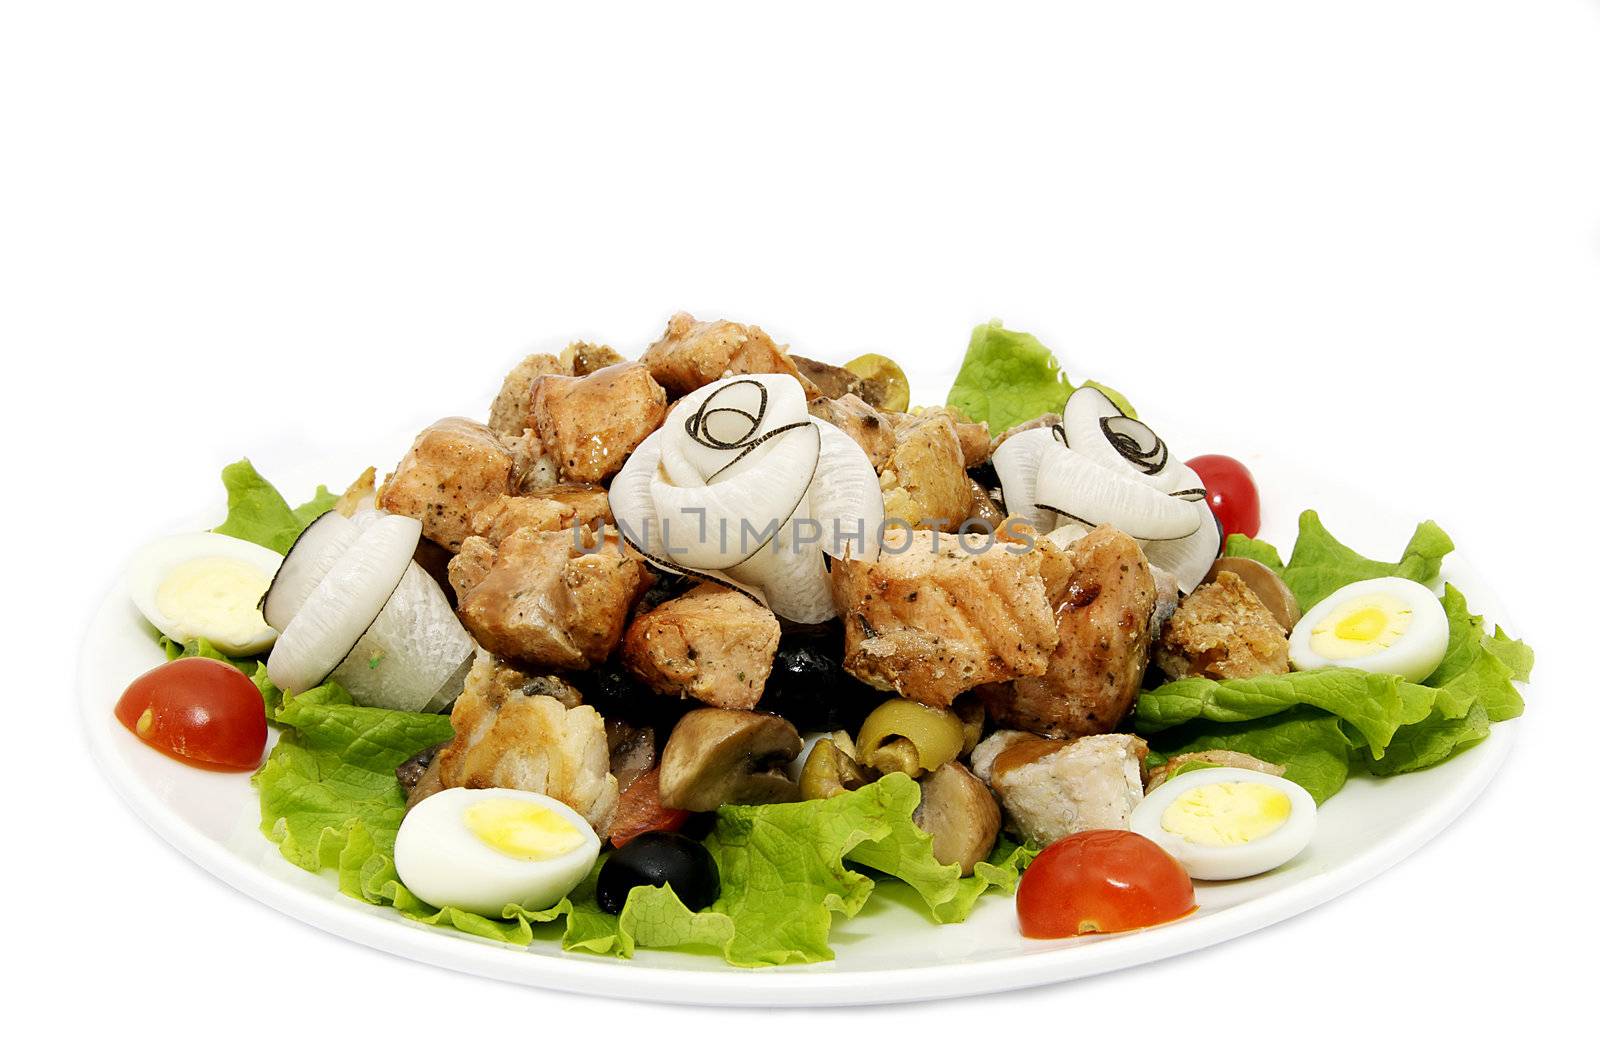 salad of fish meat by Lester120